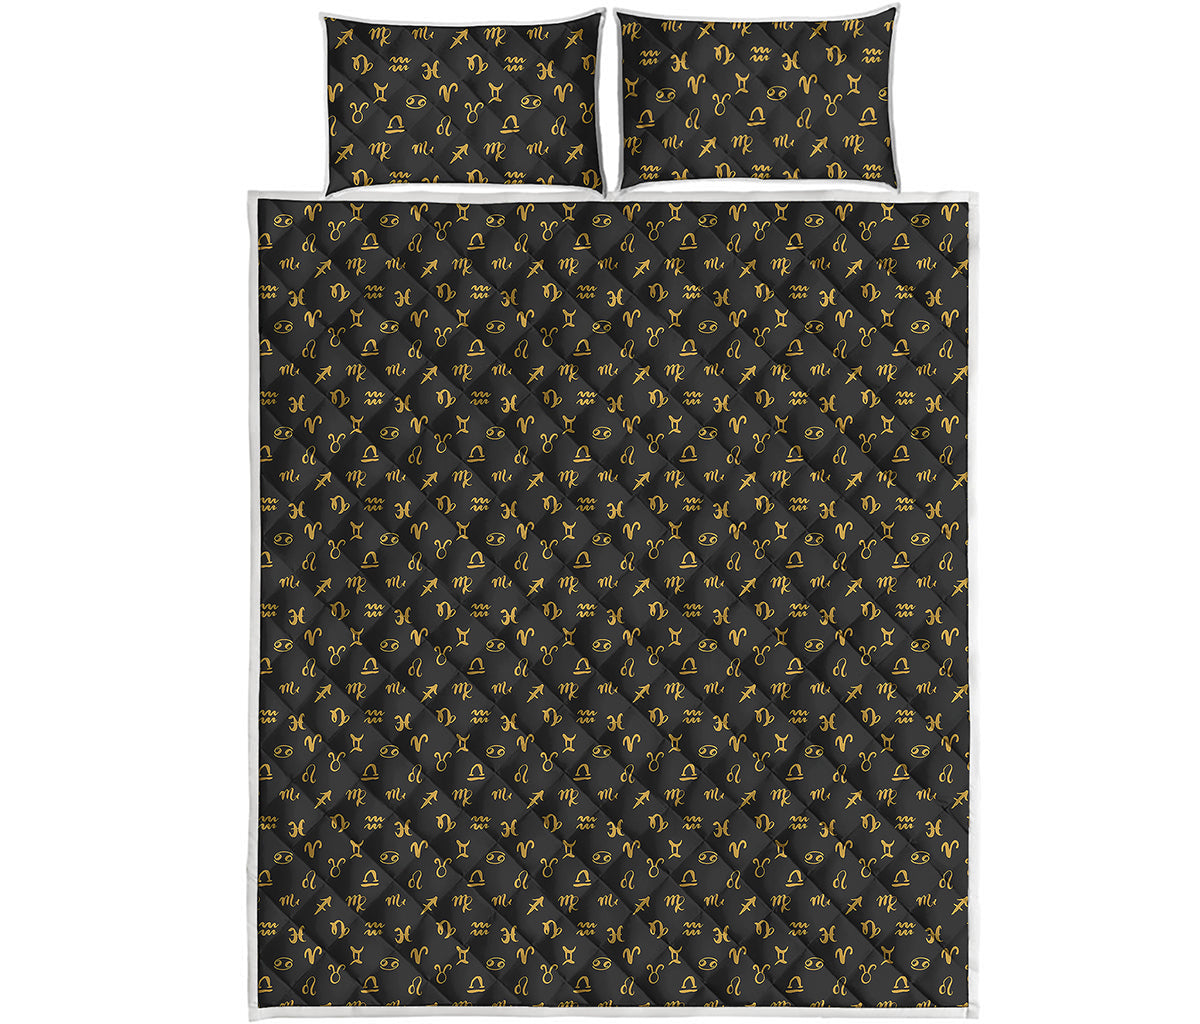 Zodiac Astrological Signs Pattern Print Quilt Bed Set